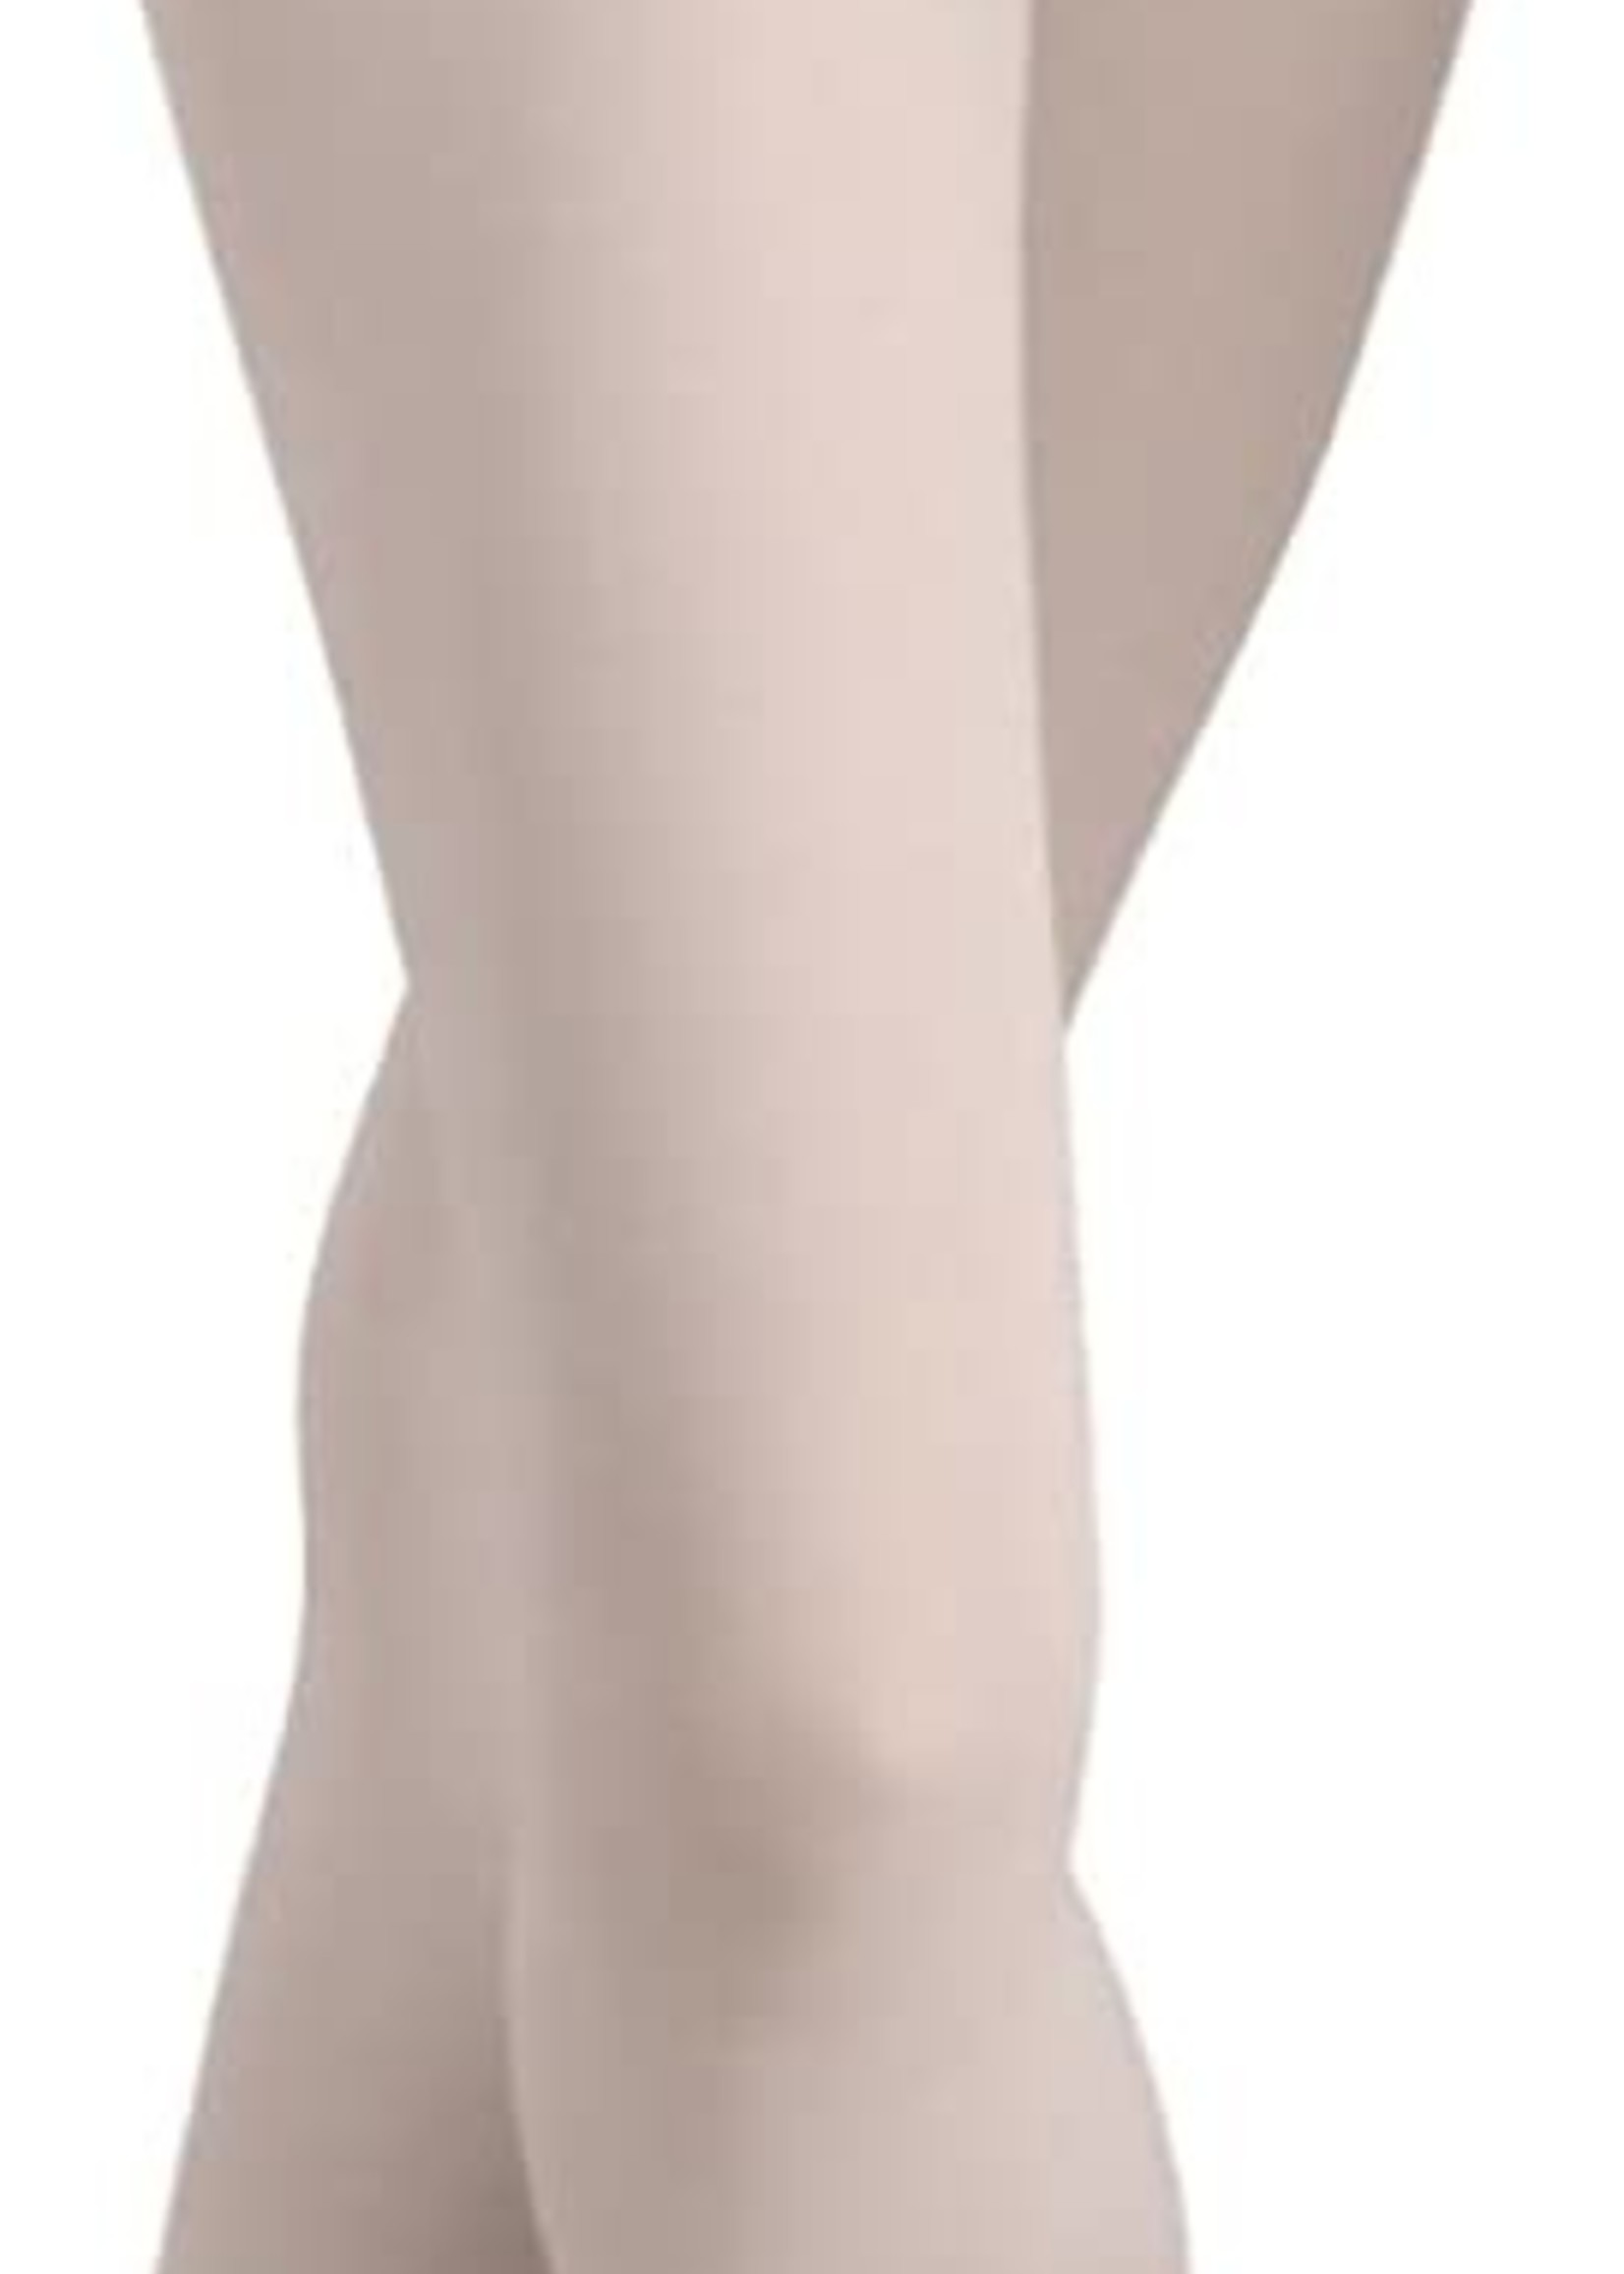 A33 Adult Footless Tights "Final Sale"